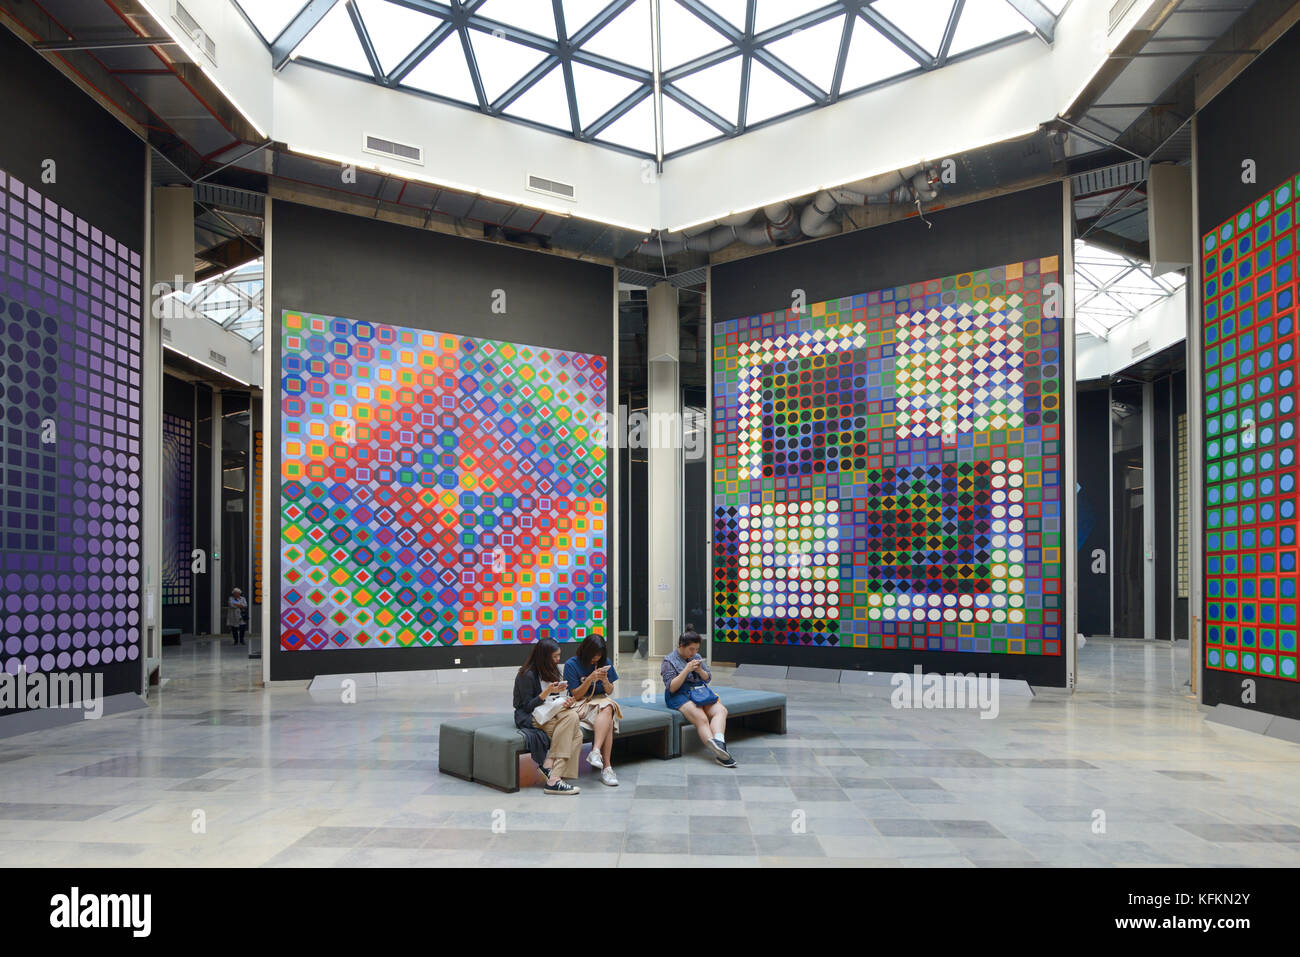 Asian Visitors Consult Smartphones in Art Gallery Interior in the Vasarely Foundation or Fondation Vasarely Museum, Aix-en-Provence, Provence, France Stock Photo